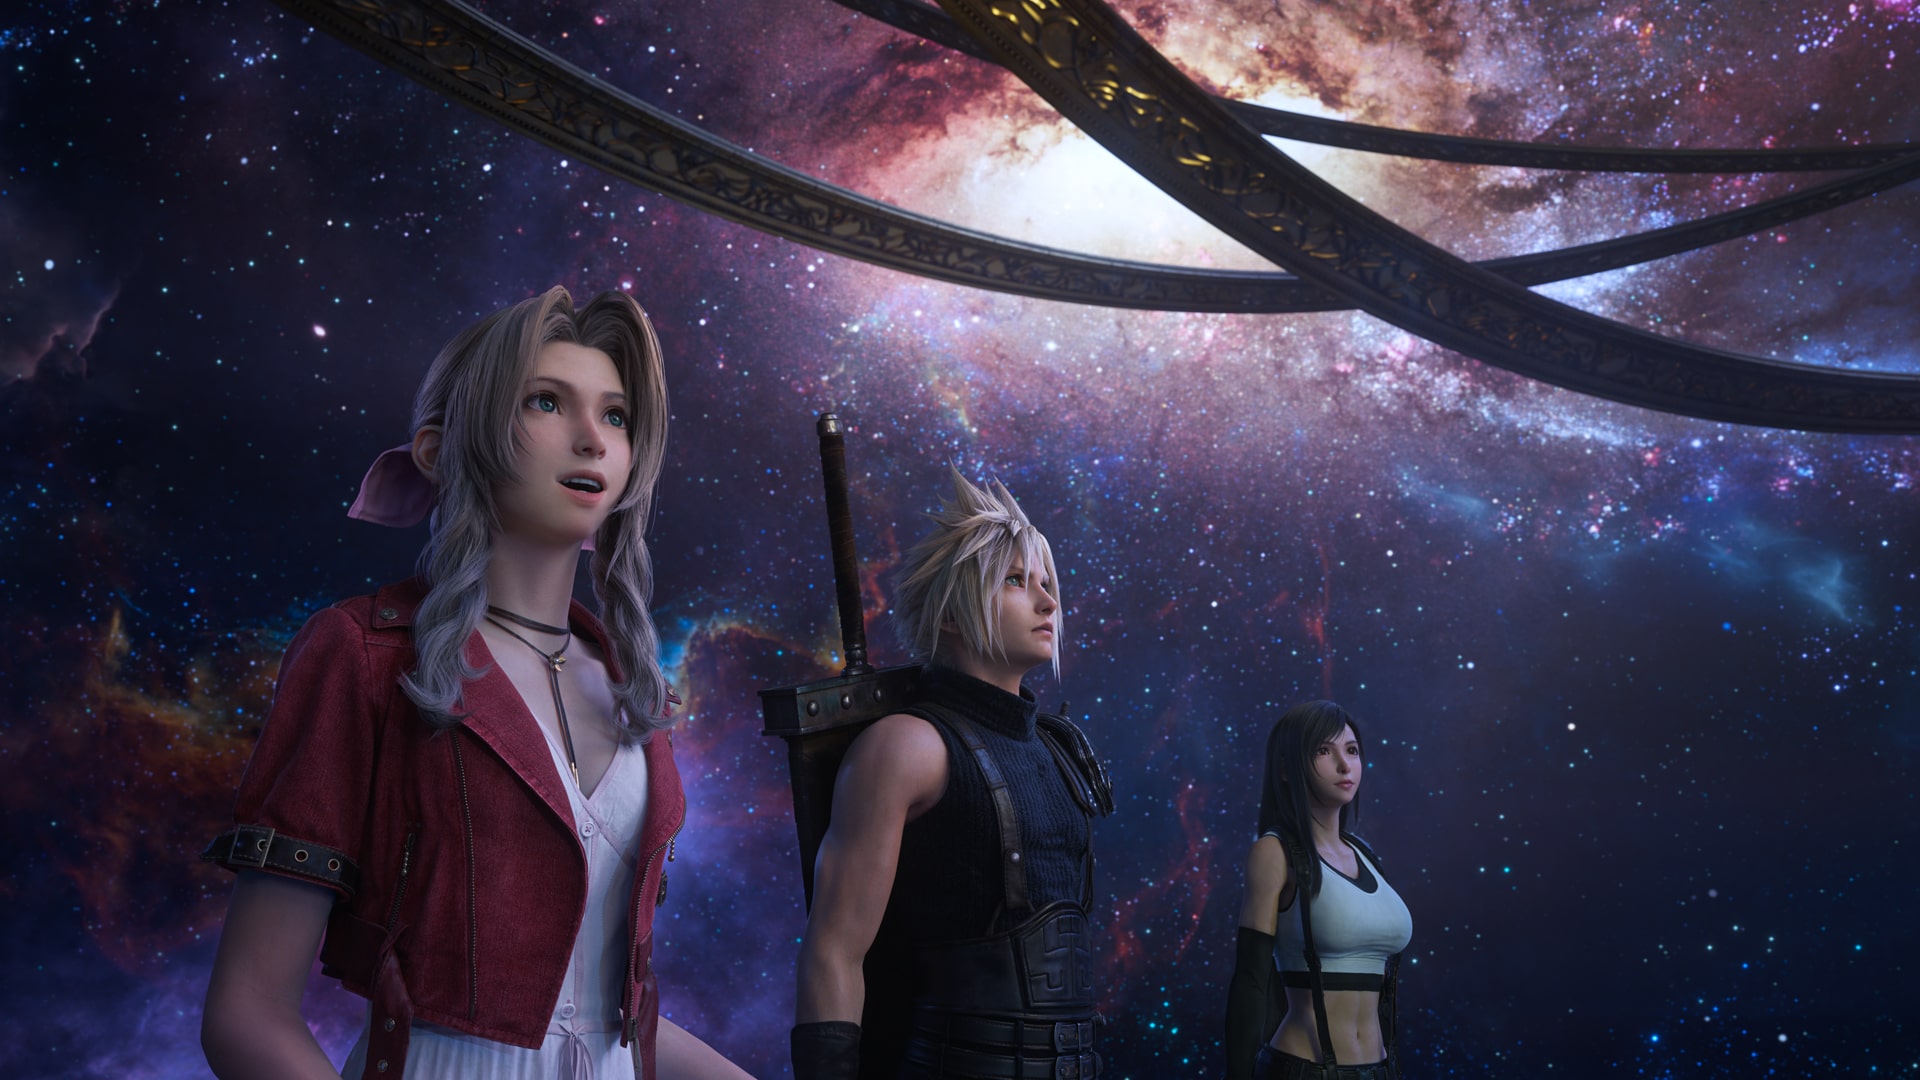 Aerith, Cloud, and Tifa from Final Fantasy VII Rebirth